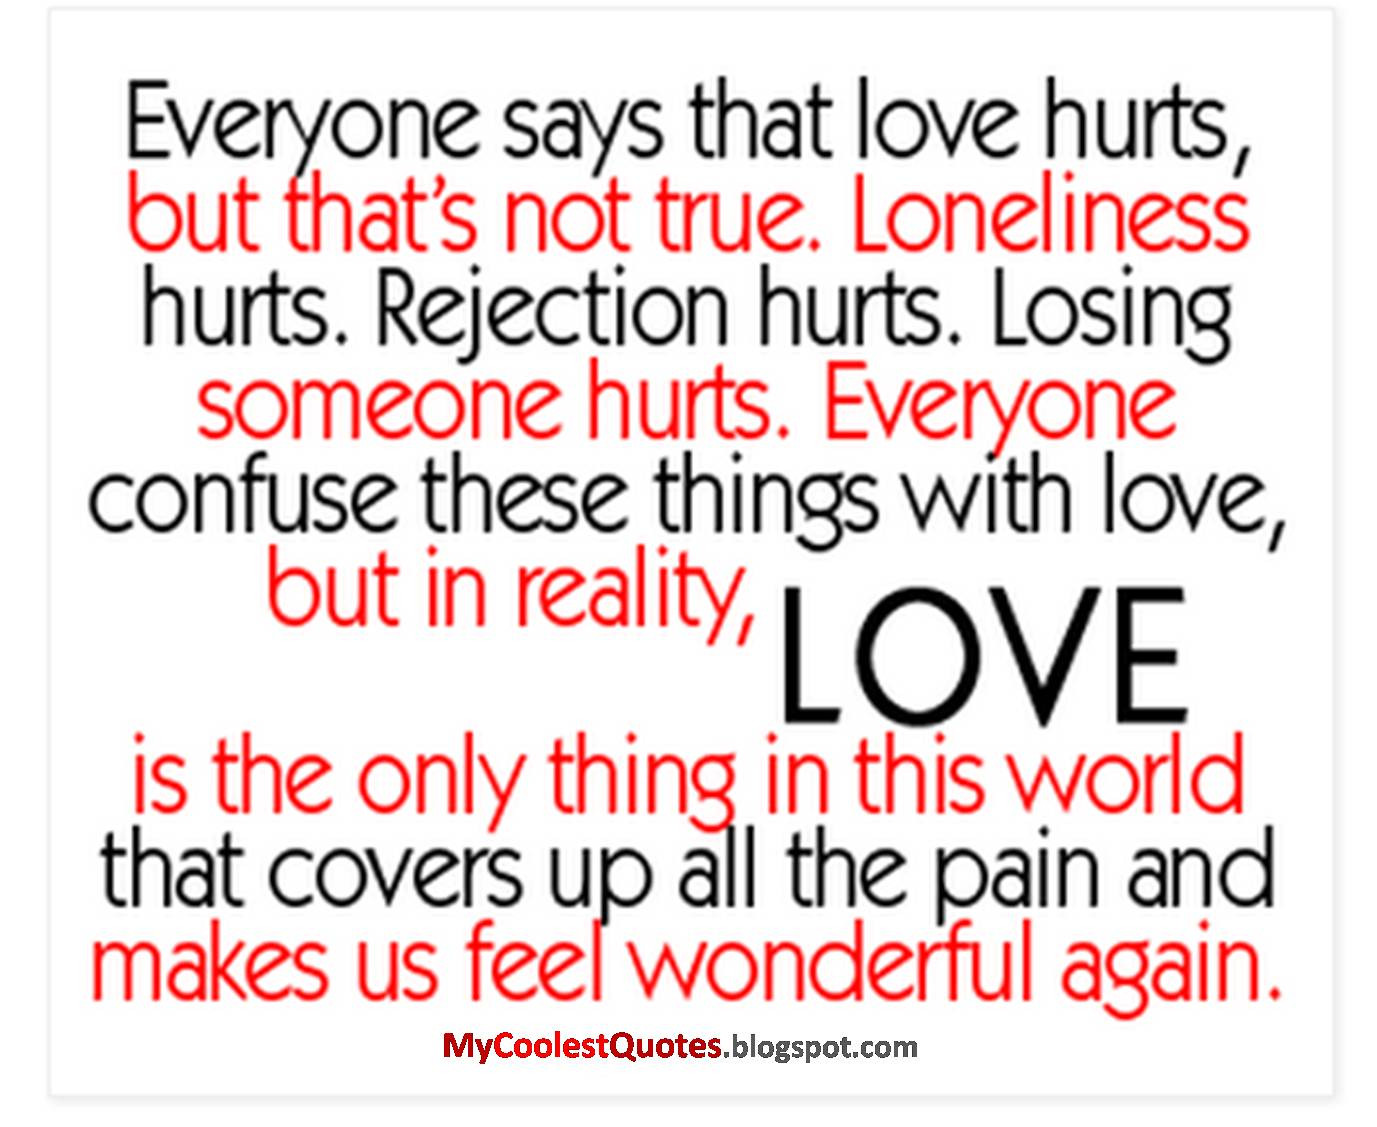 Relationship Hurt Quotes
 My Coolest Quotes Does LOVE really HURT